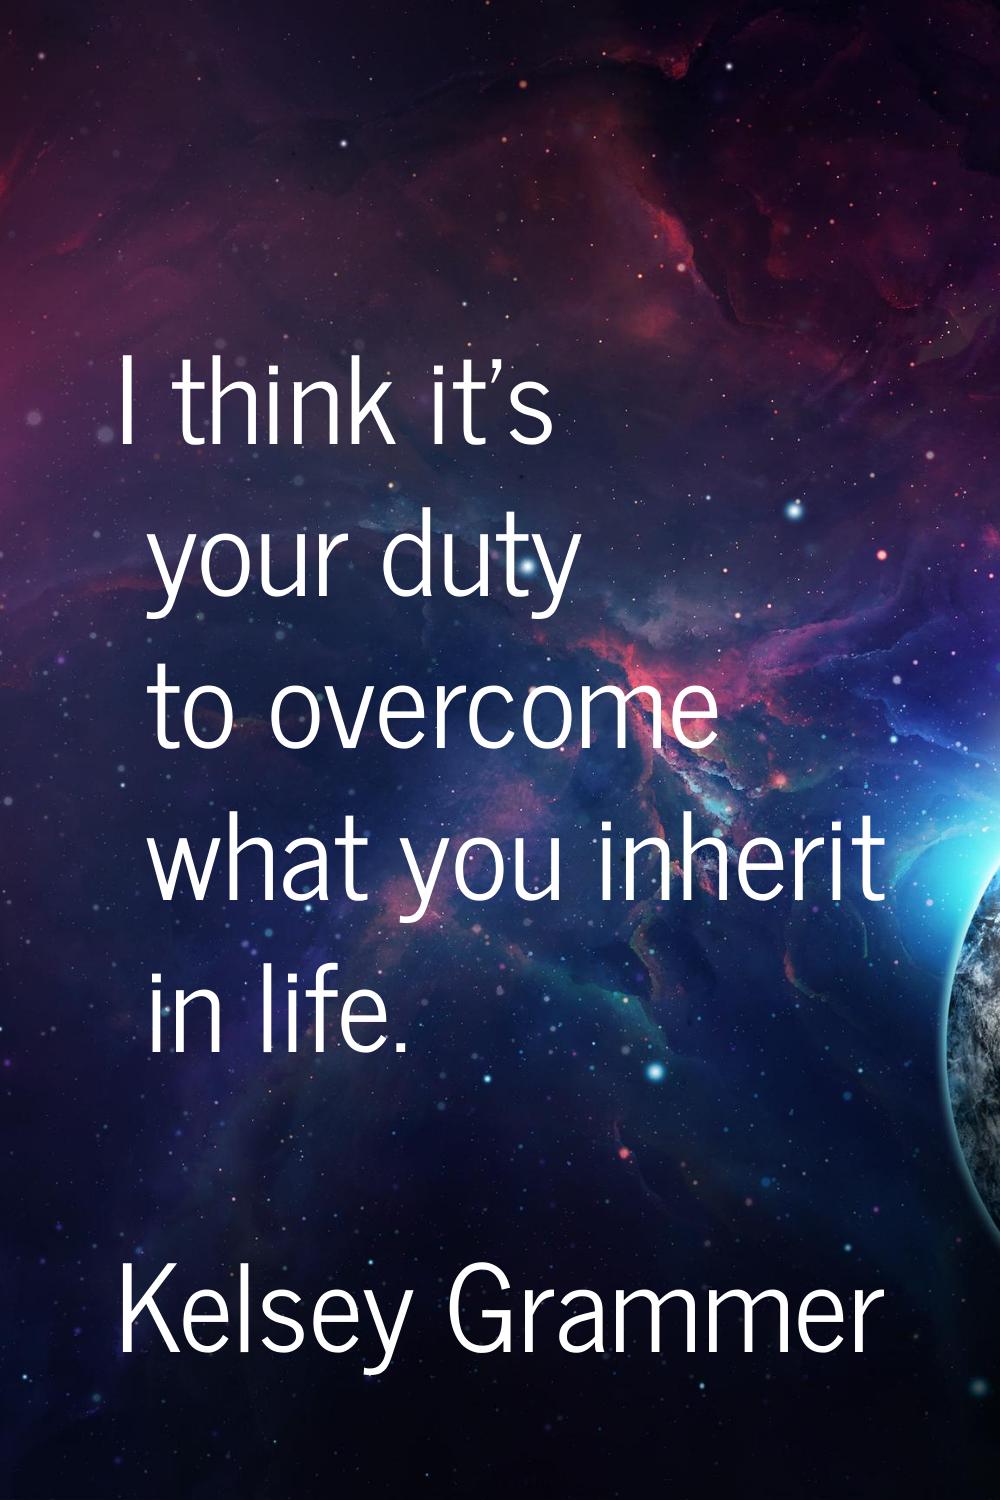 I think it's your duty to overcome what you inherit in life.